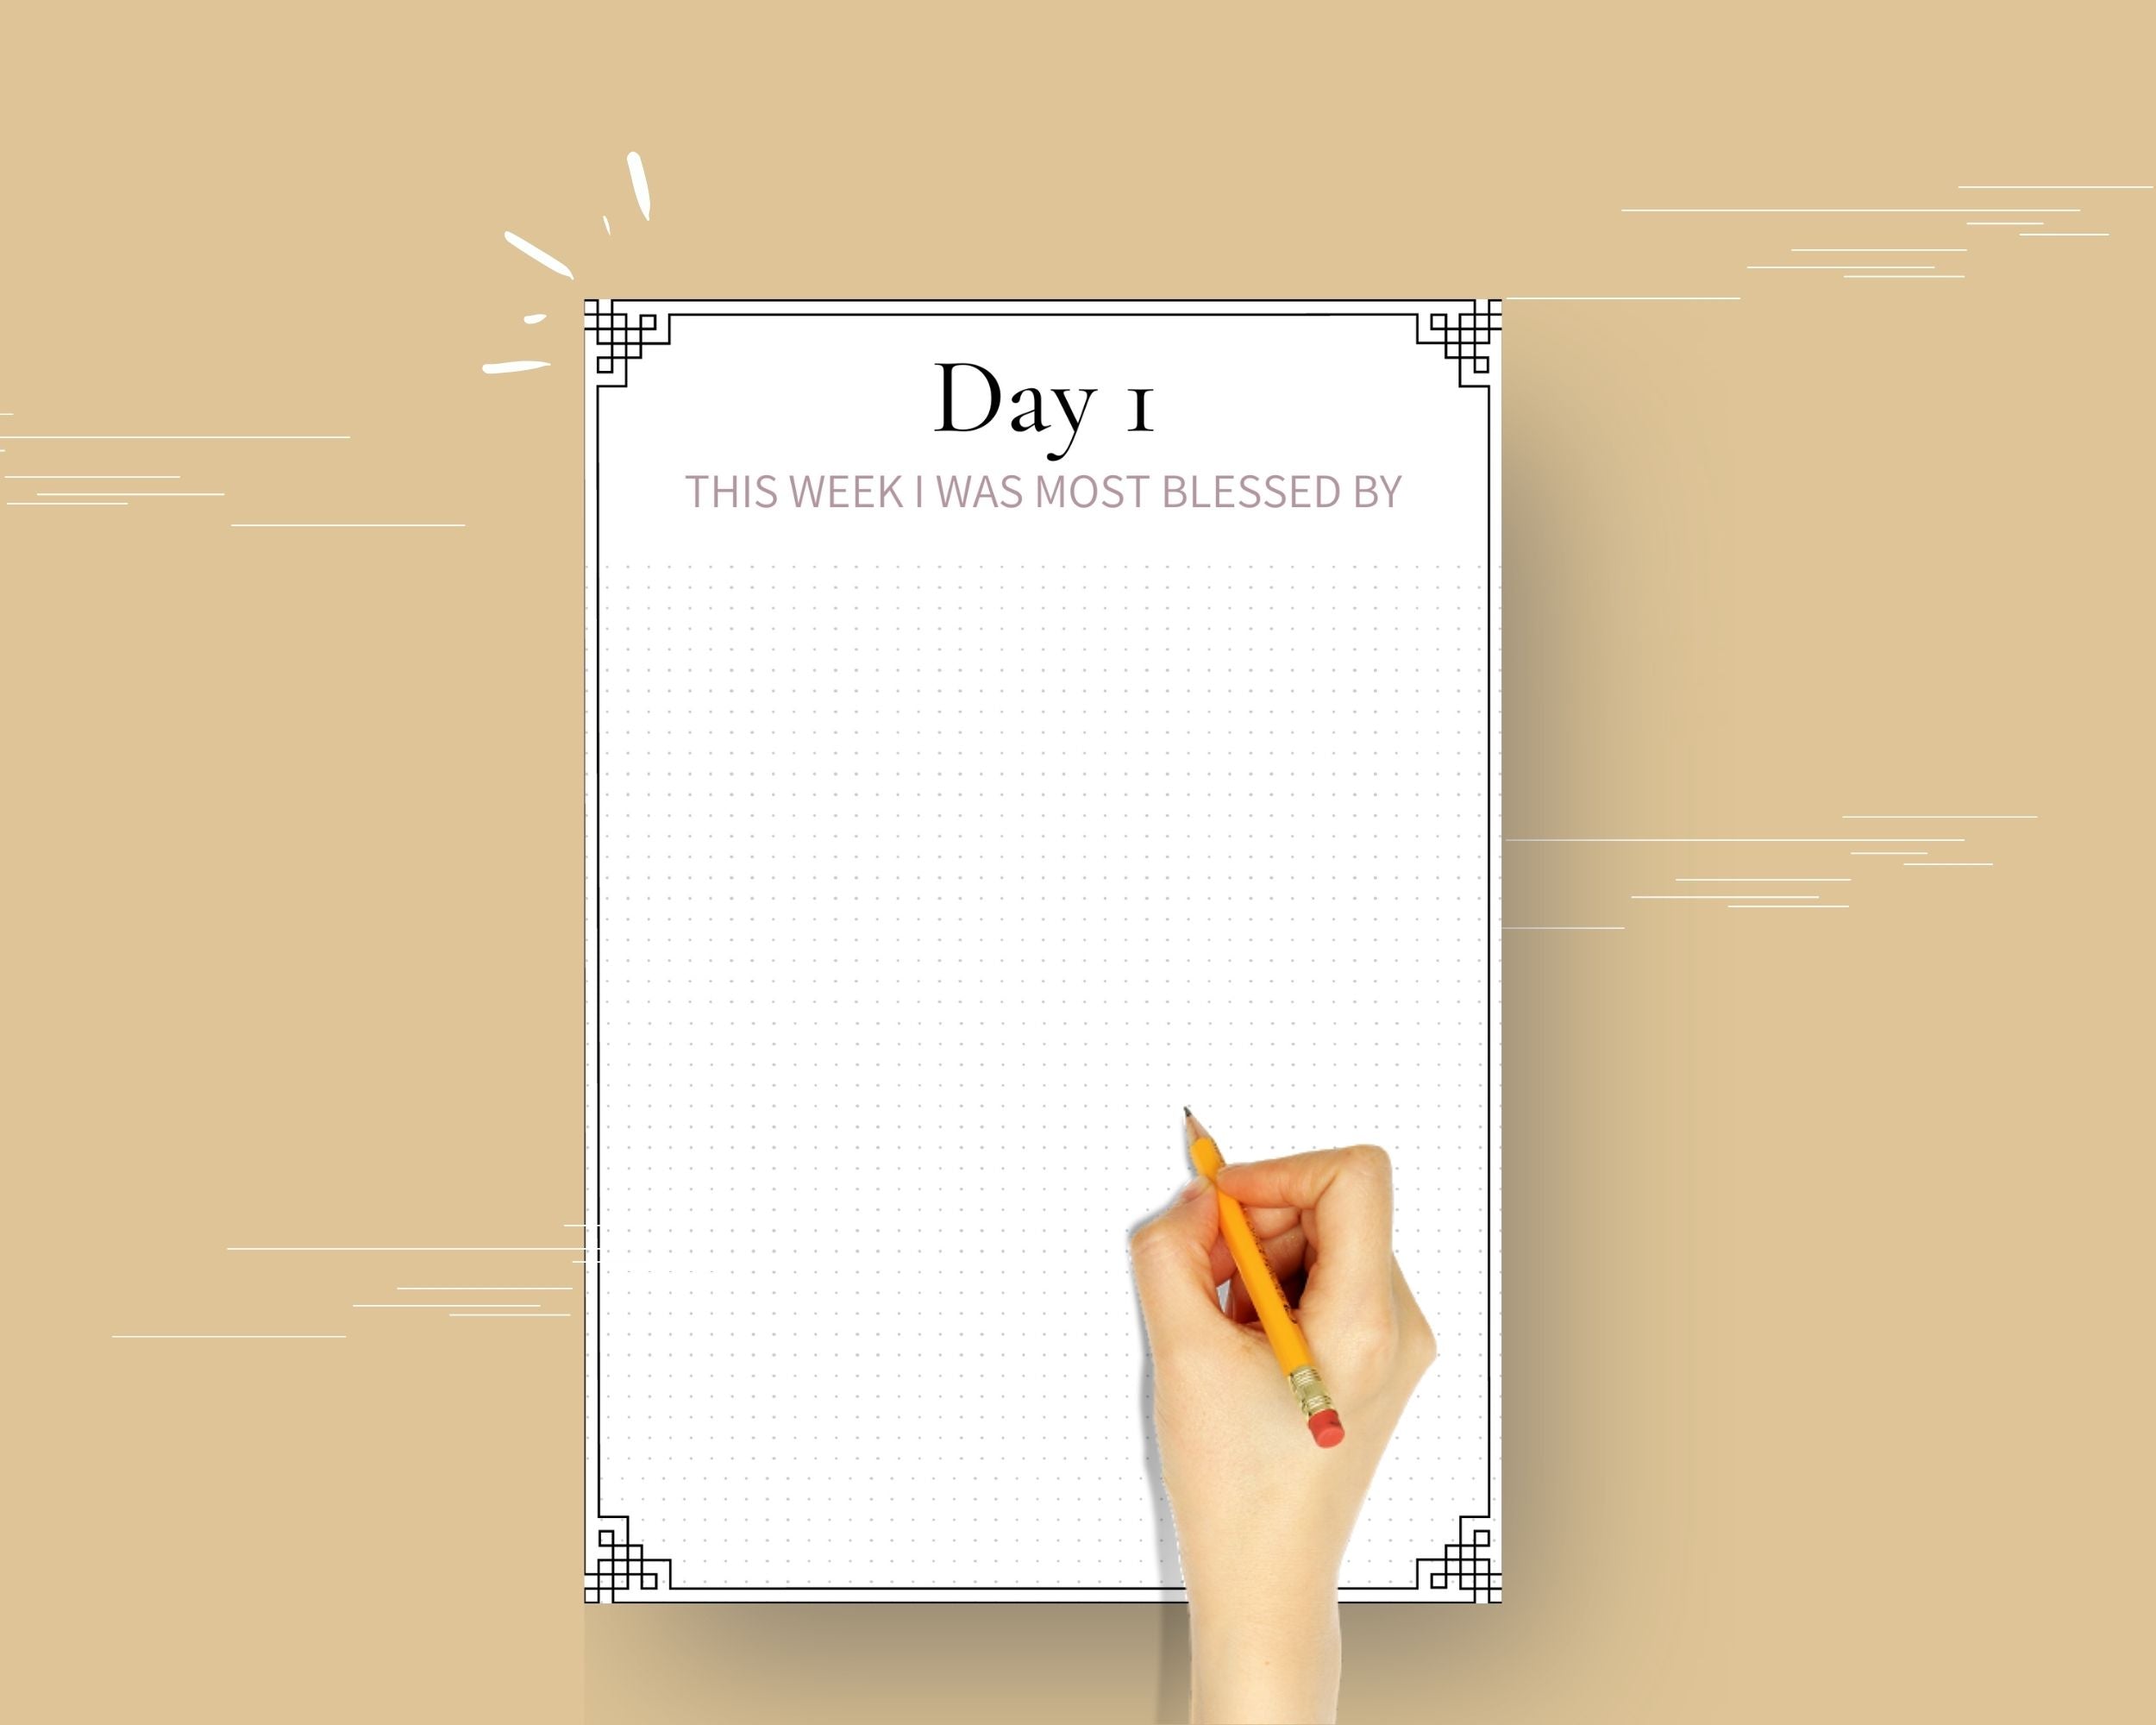 20 Day Spiritual Journaling | Editable Canva Template A4 Size